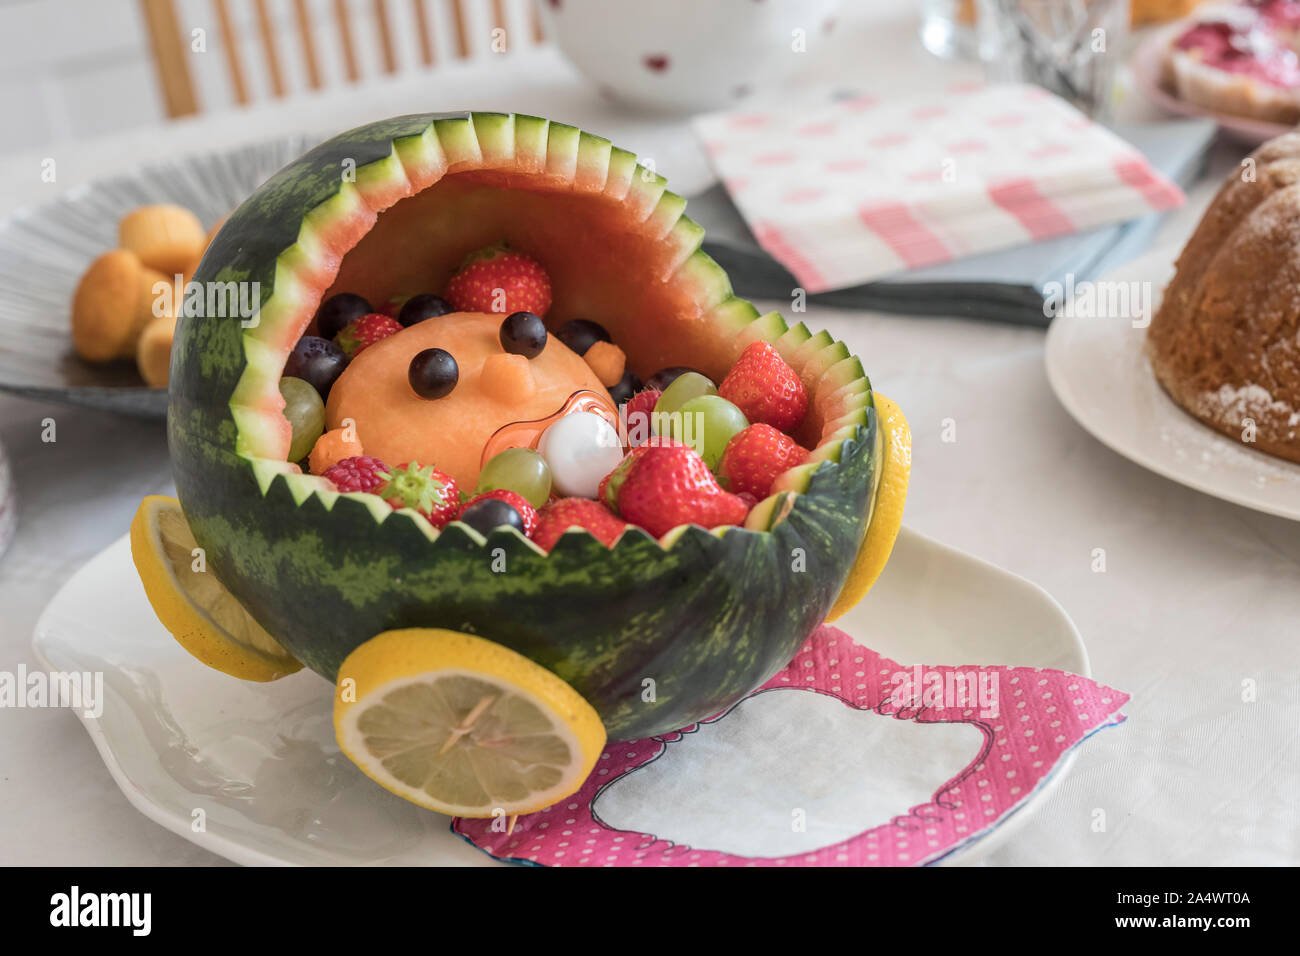 A baby in a baby carriage made out of fresh fruit. The carriage is made out of a watermelon. Served at baby shower, celebration of the new baby and mo Stock Photo